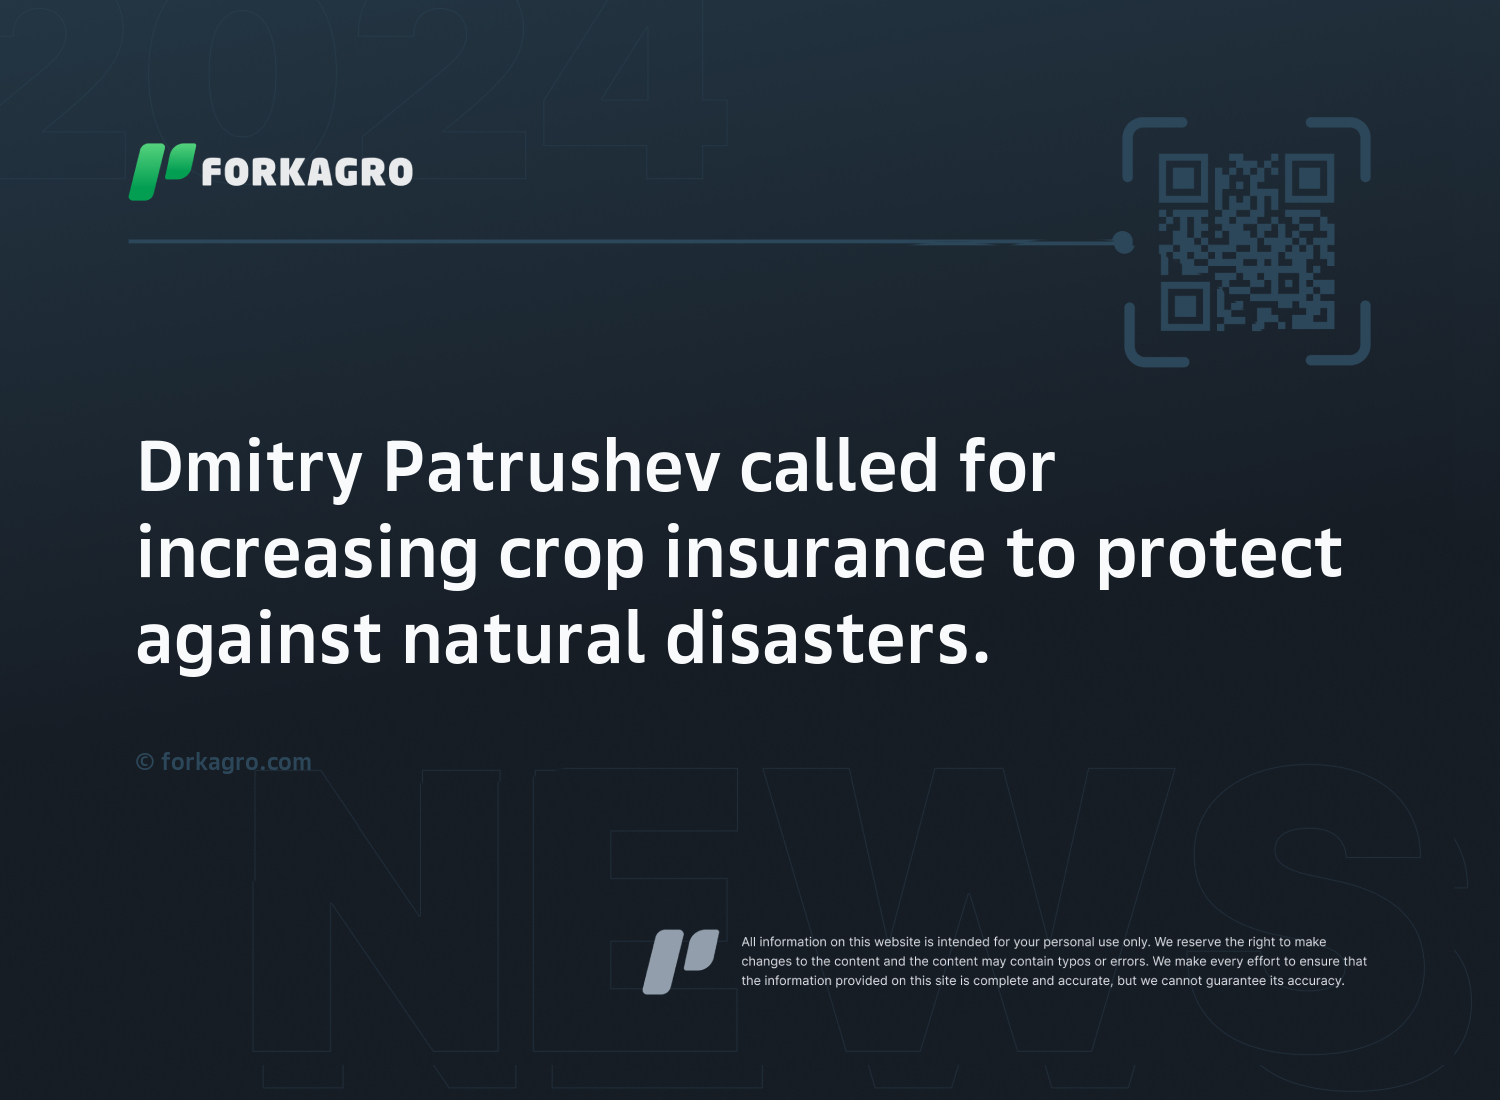 Dmitry Patrushev called for increasing crop insurance to protect against natural disasters.